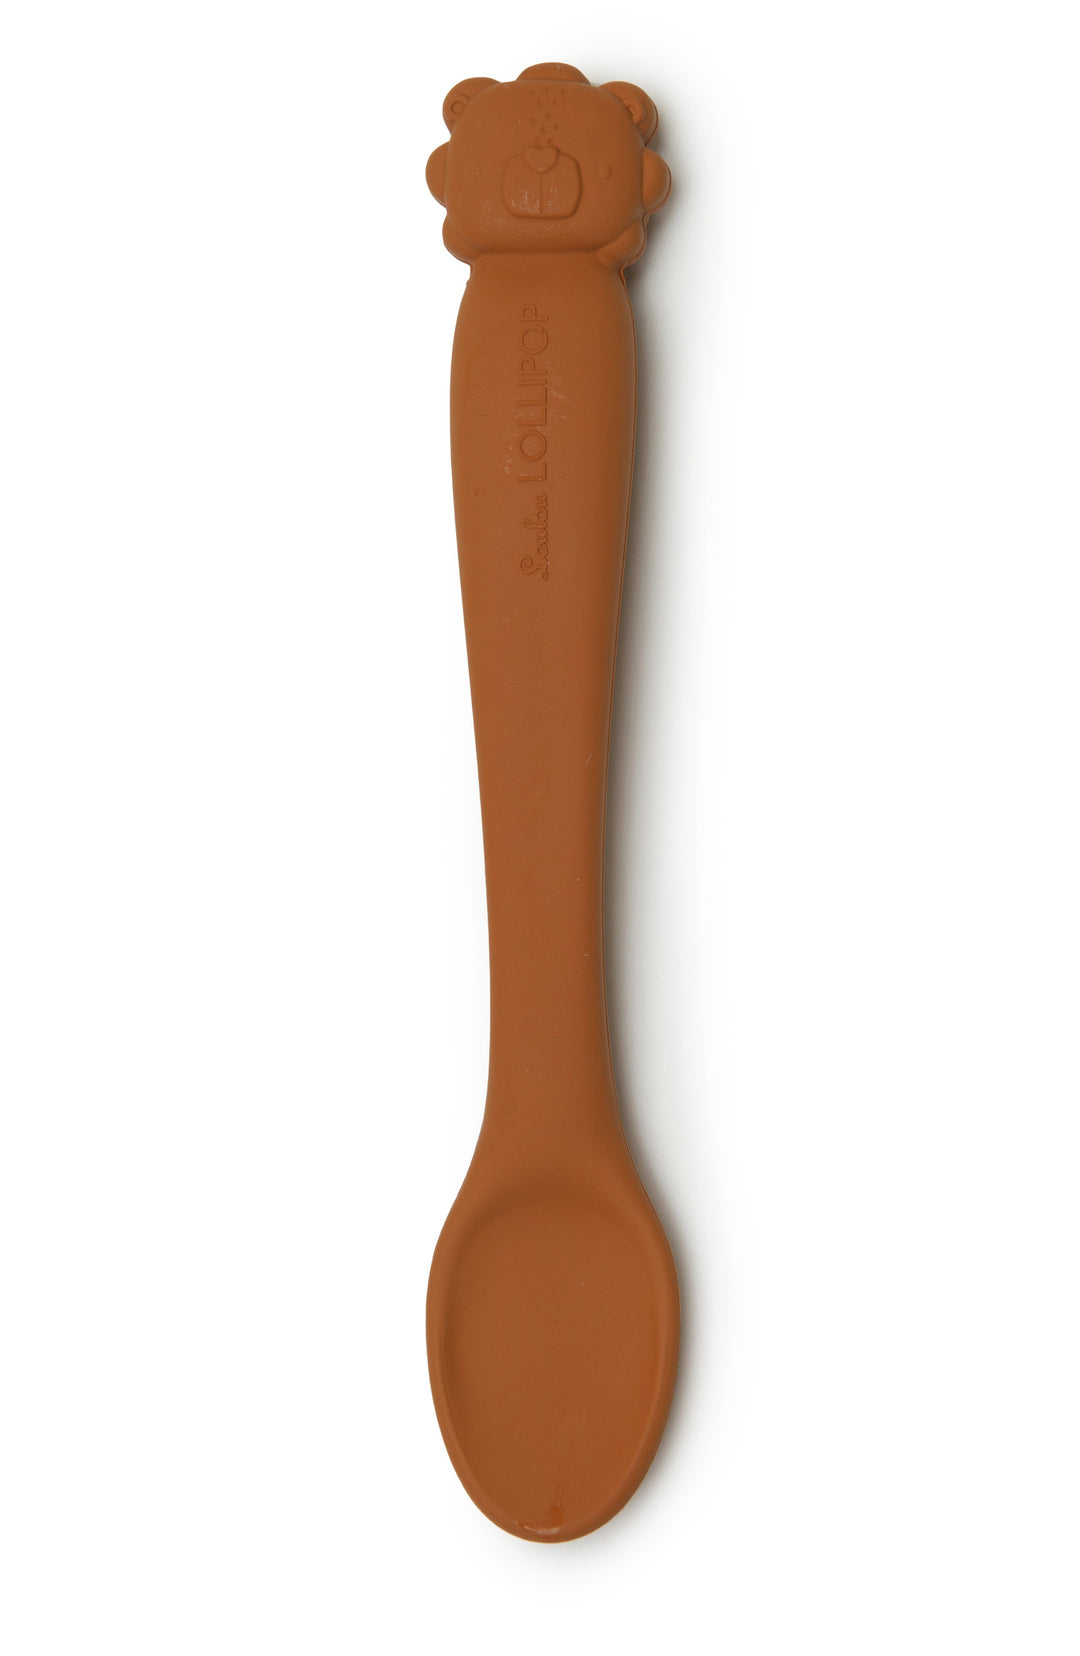 Lion Honey GingerSilicone Infant Feeding Spoon from LouLou Lollipop